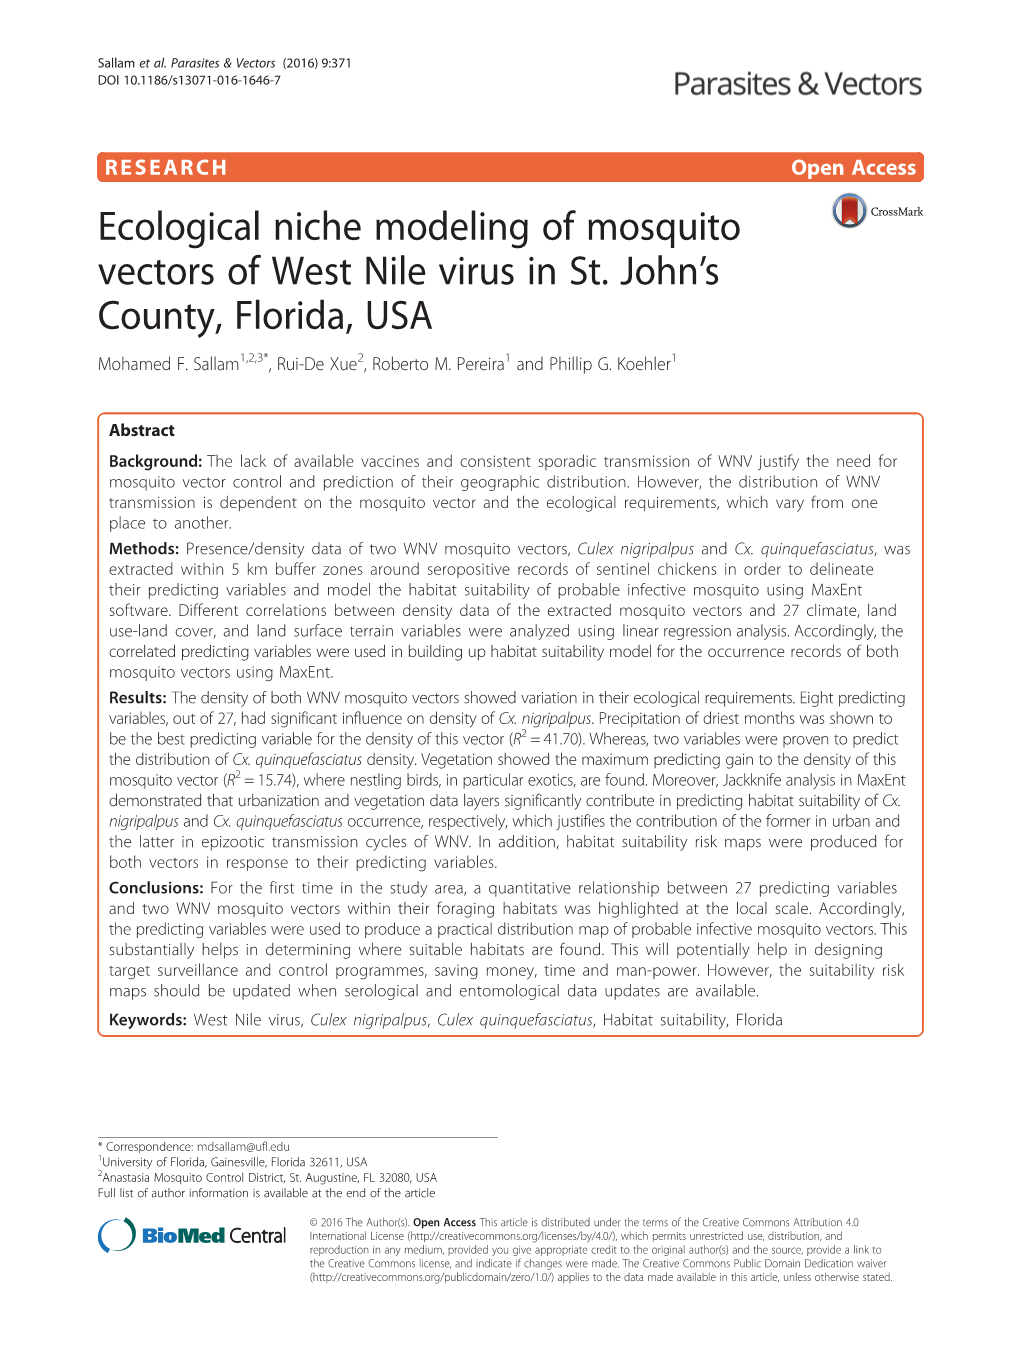 Ecological Niche Modeling of Mosquito Vectors of West Nile Virus in St